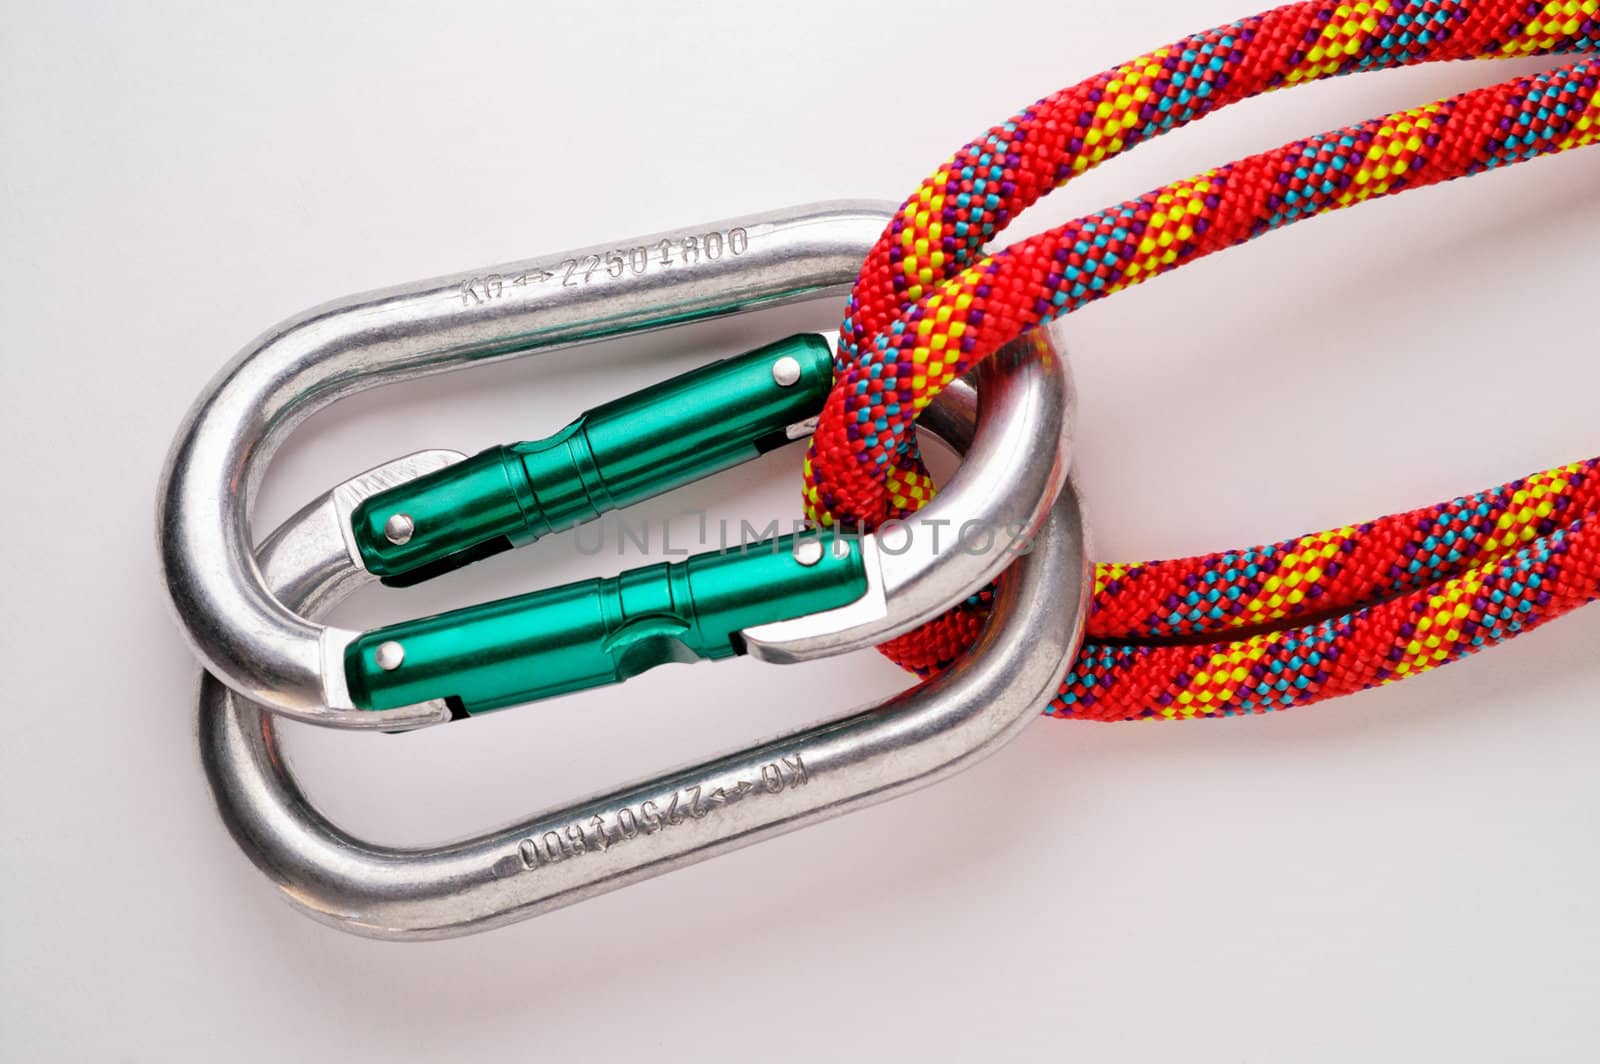 Mountaineering: doubled oval aluminium carabiners (SAFE)